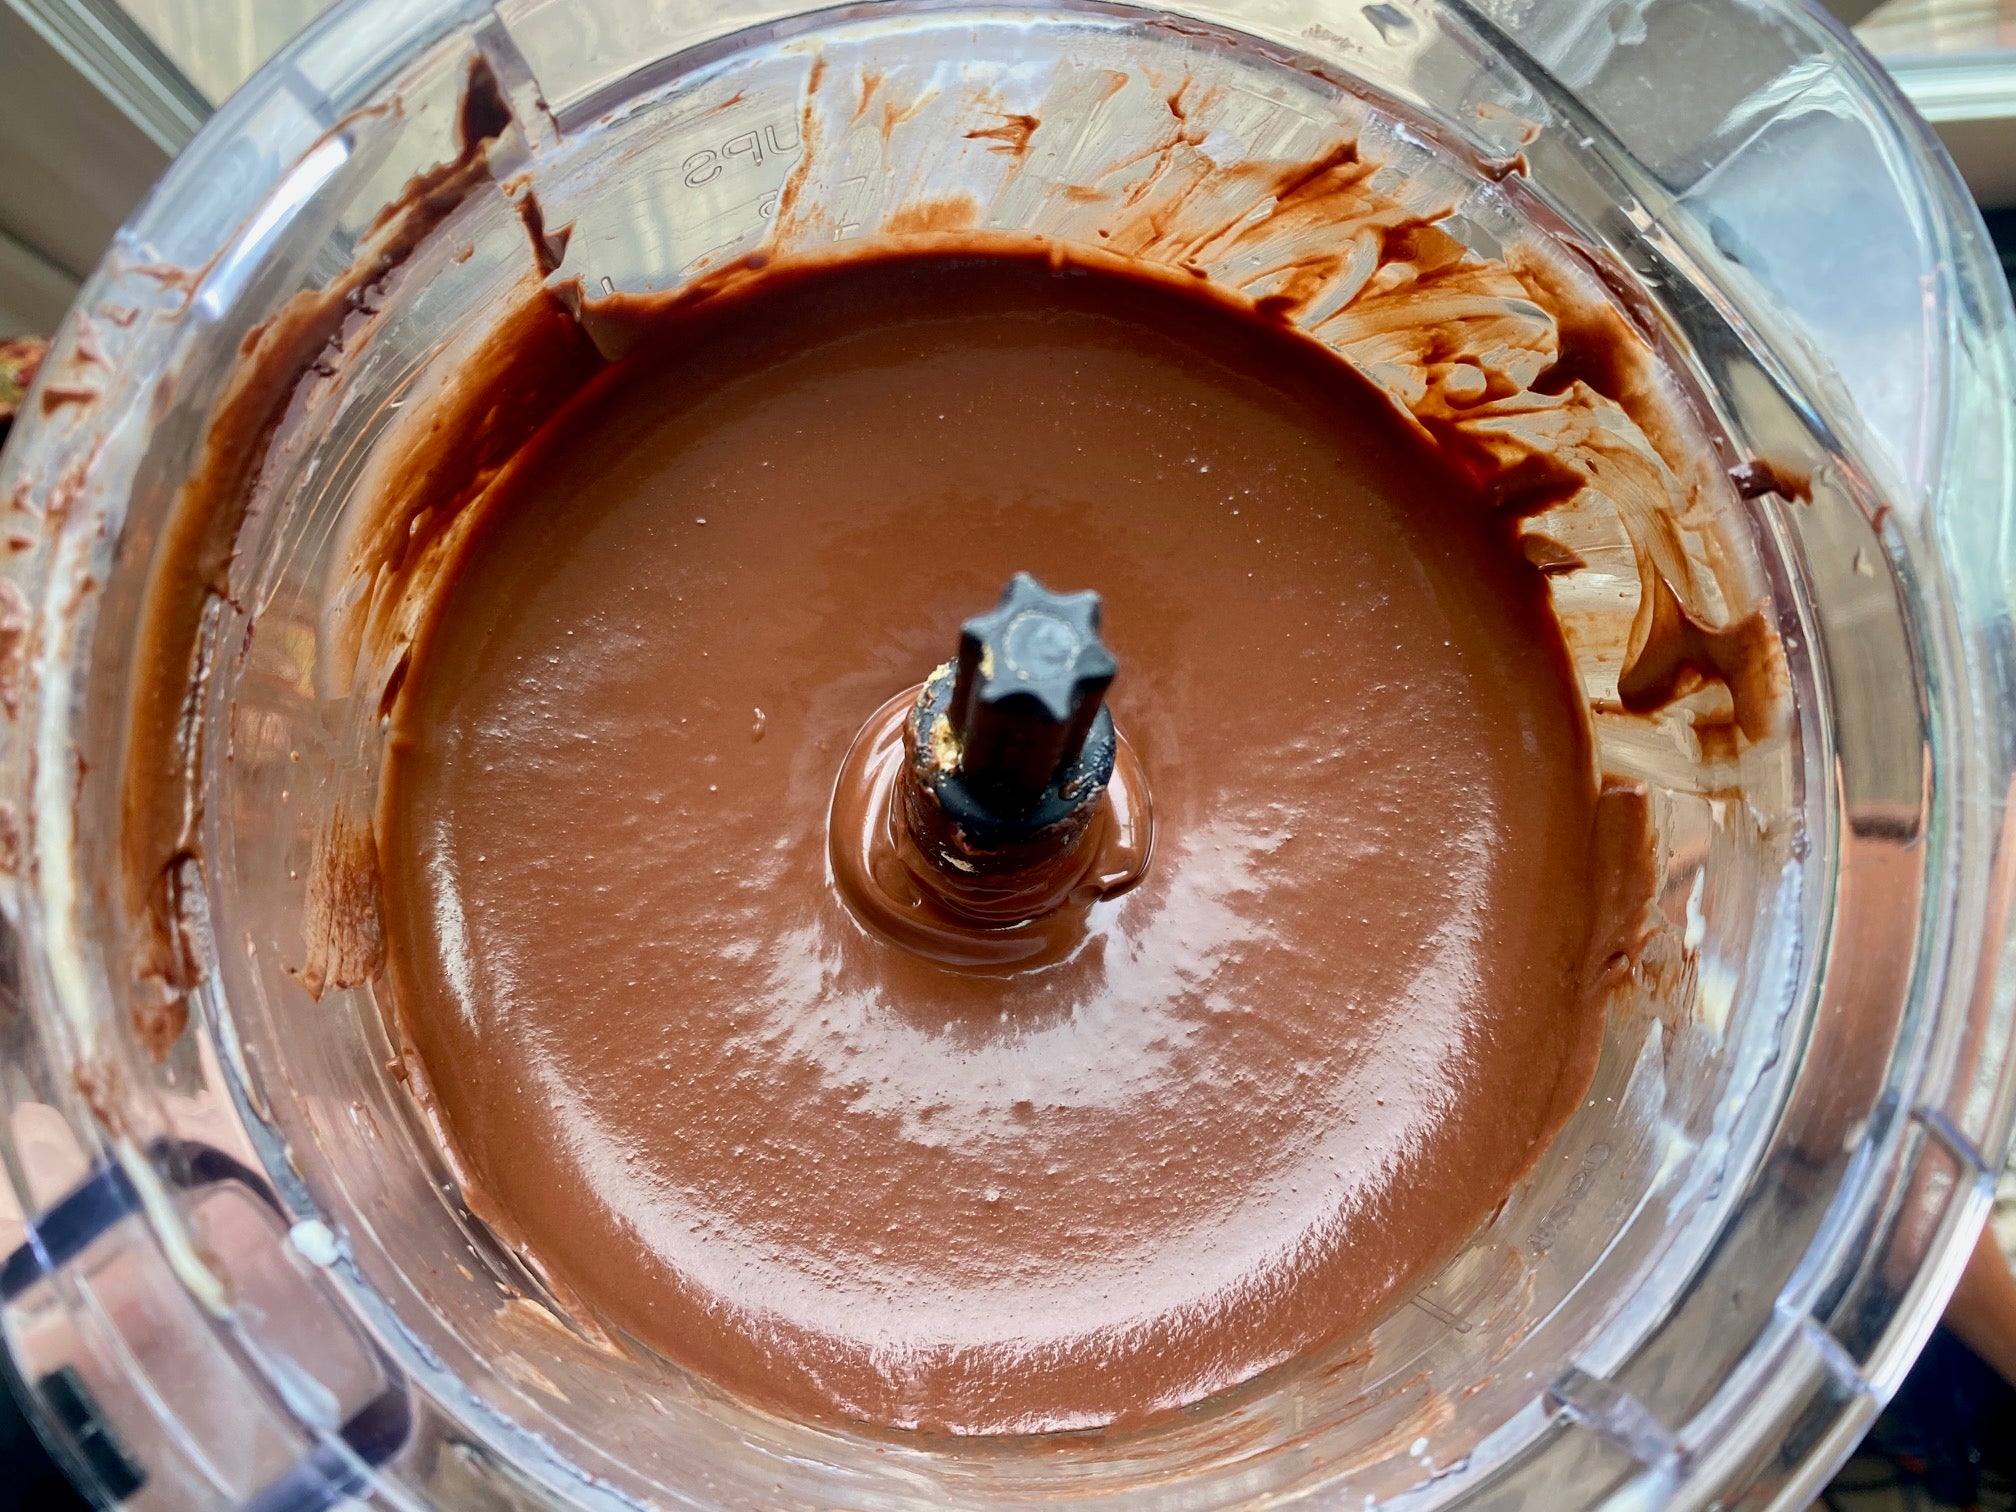 After the final blend, the chocolate pie filling is ready. (Photo: Allie Chanthorn Reinmann)